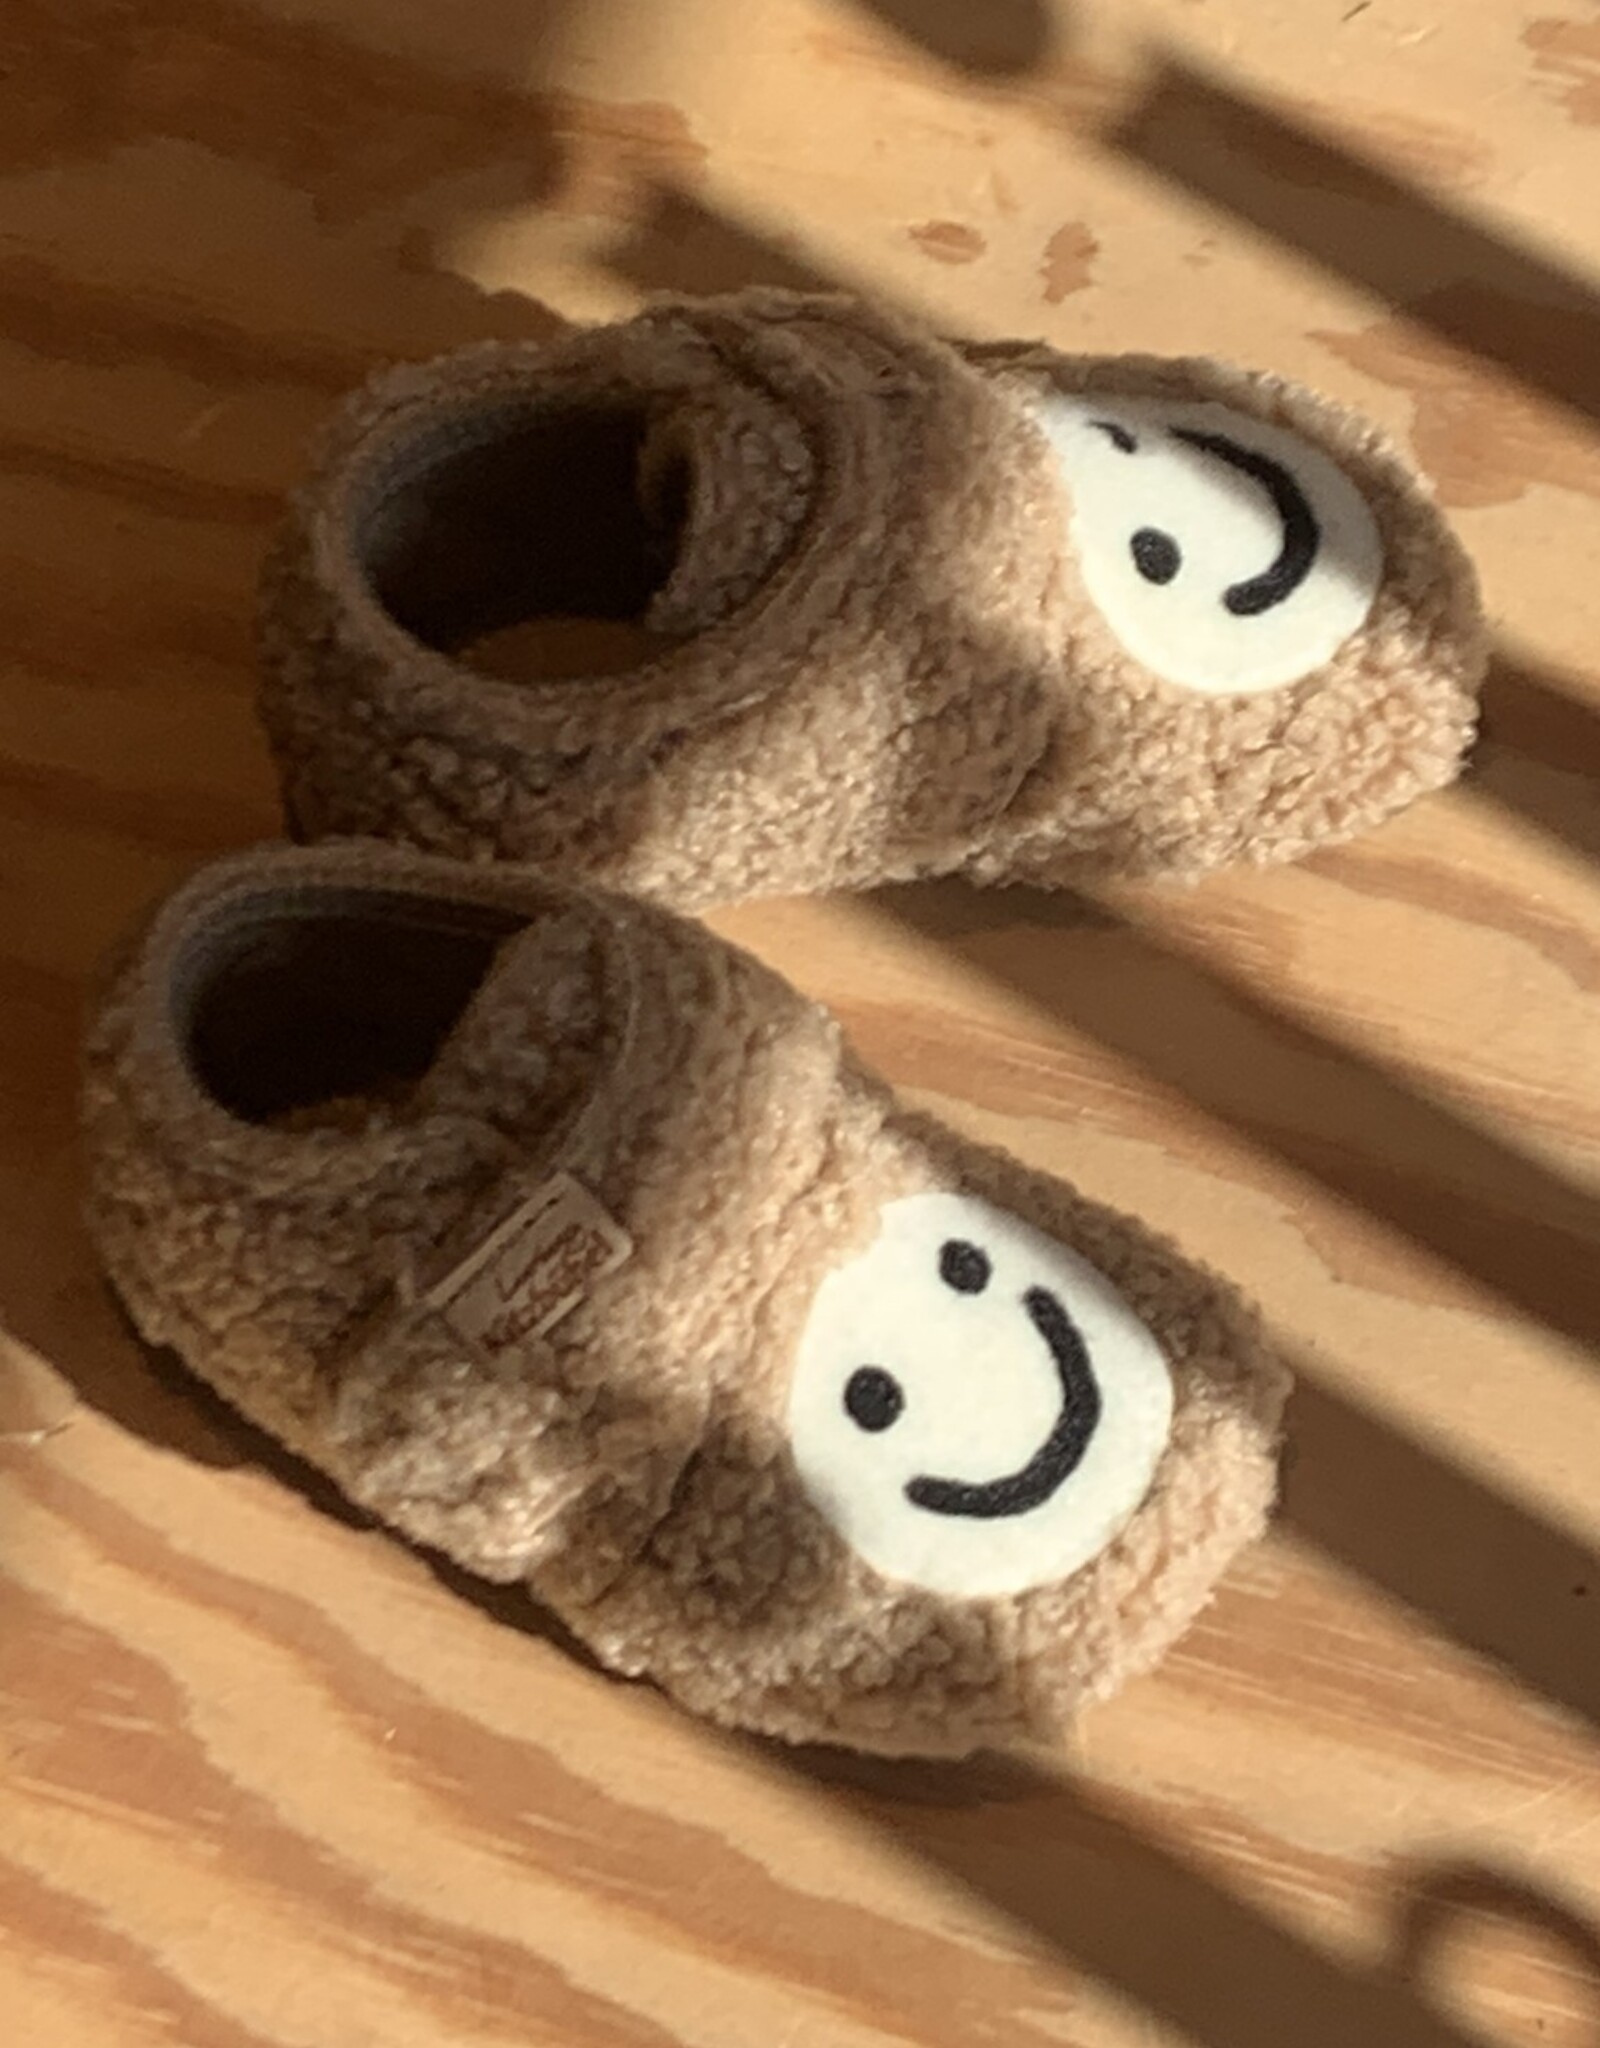 Living Kitzbühel FROTTEE SMILEY - Chaussons - sand/beige 